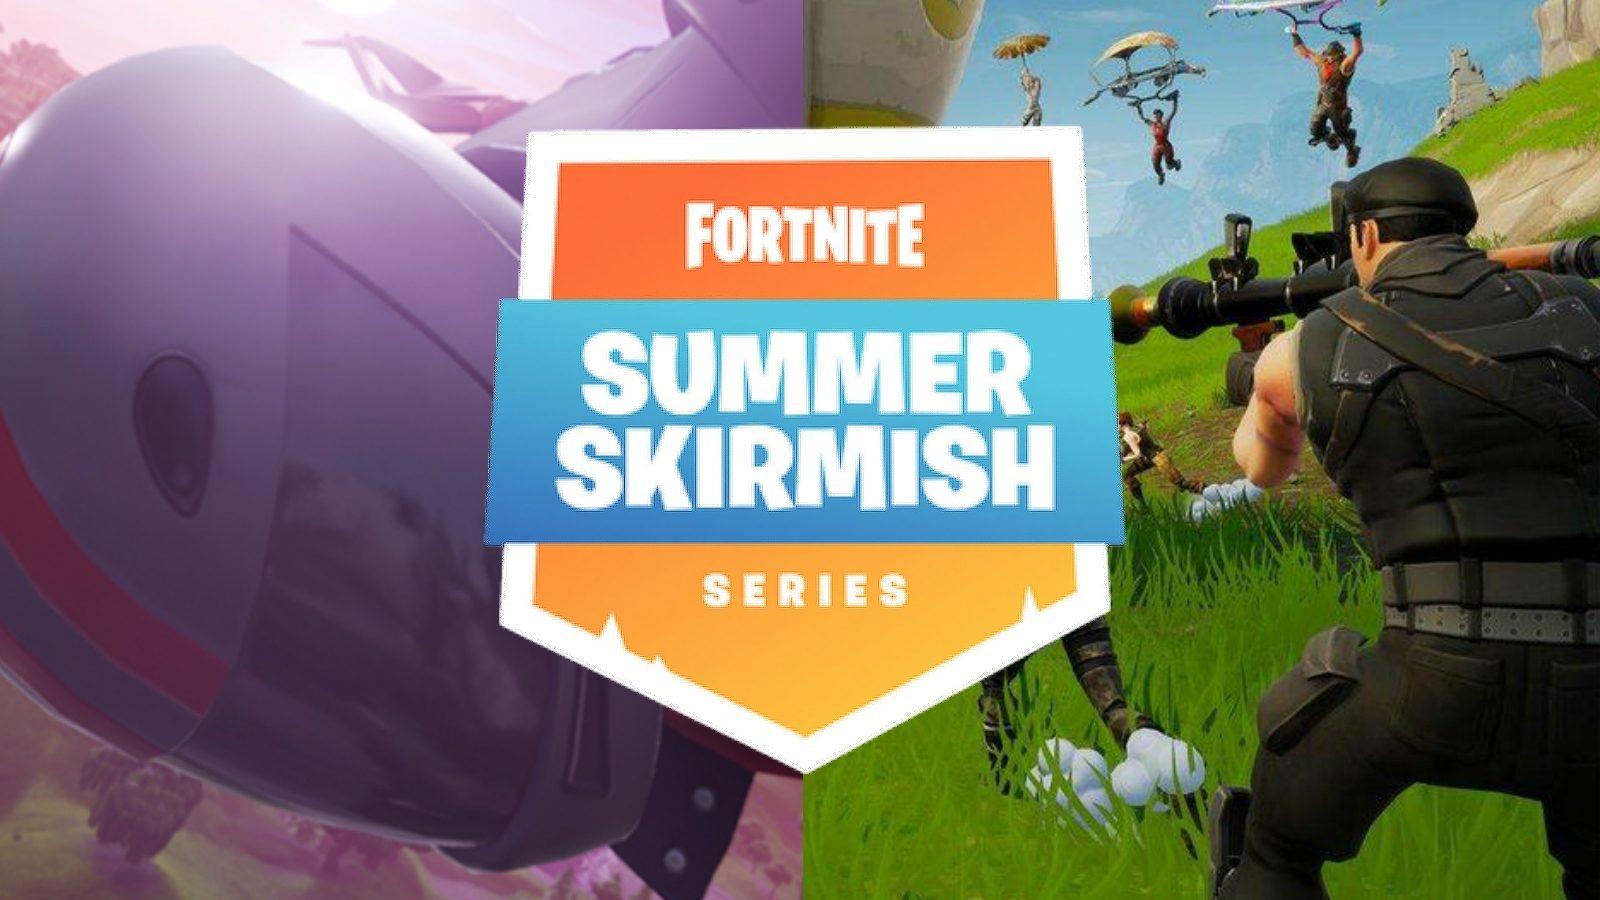 Fortnite Summer Skirmish: Epic Games announces first official